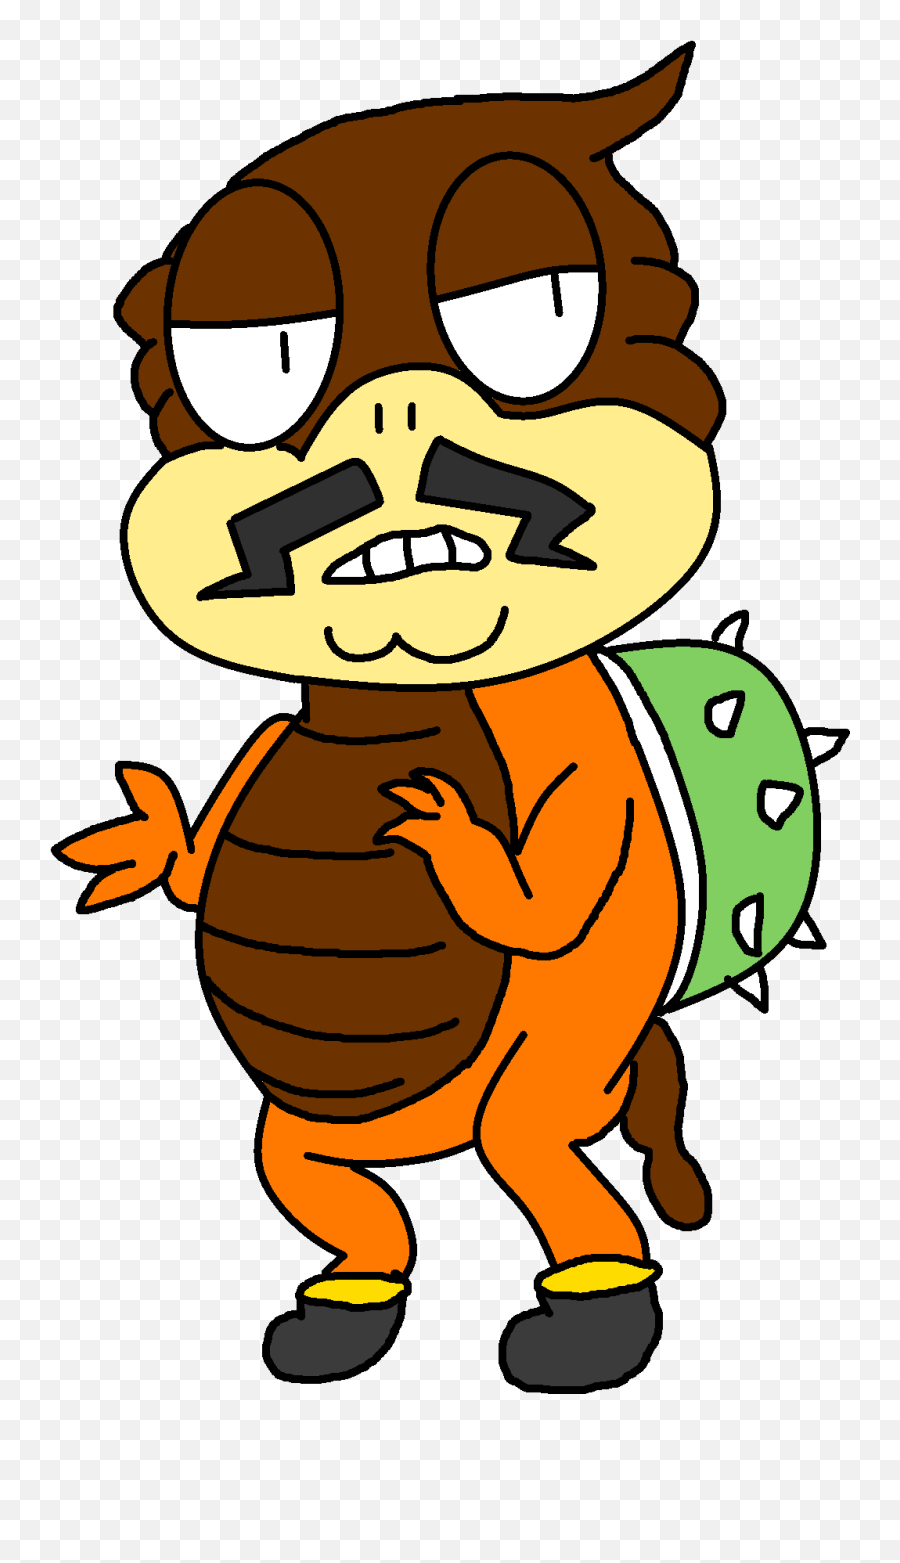 Download Poopbuttshattered - Donkey Kong Full Size Png Cartoon,Funky Kong Png